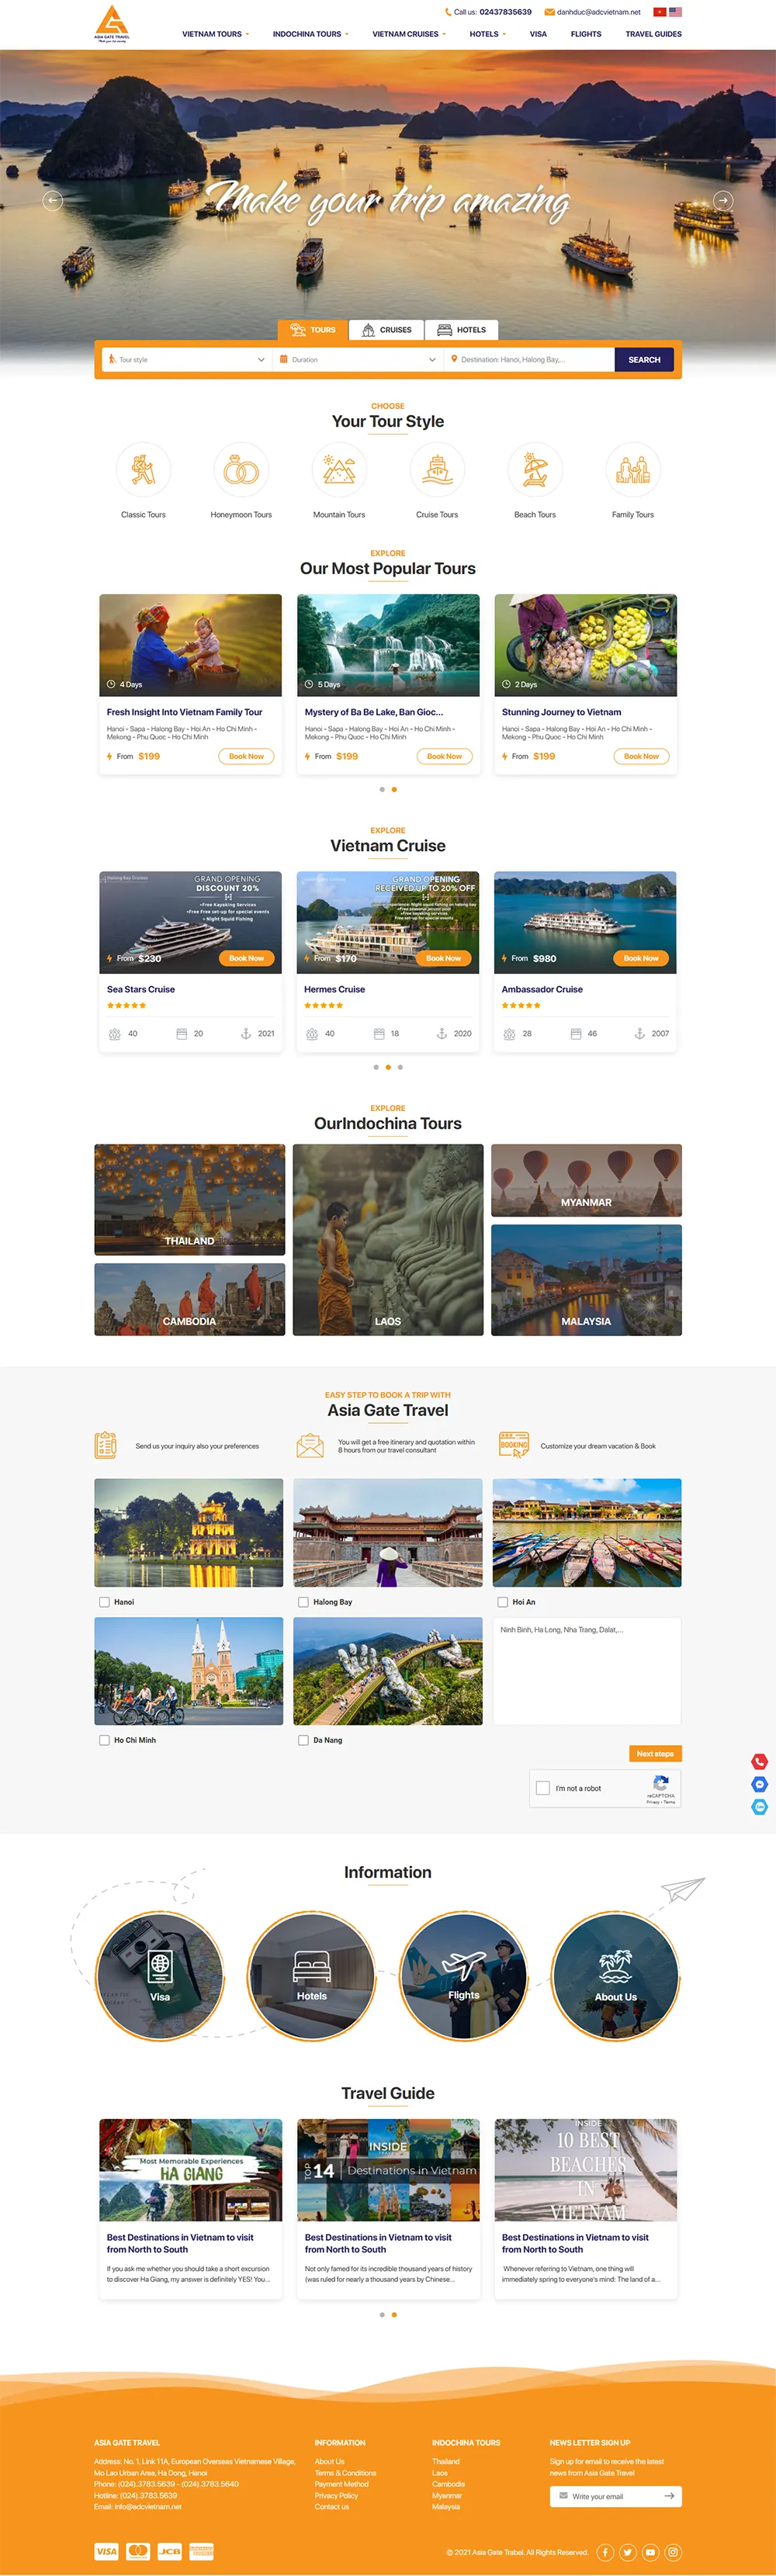 Giao diện website Asia Gate Travel